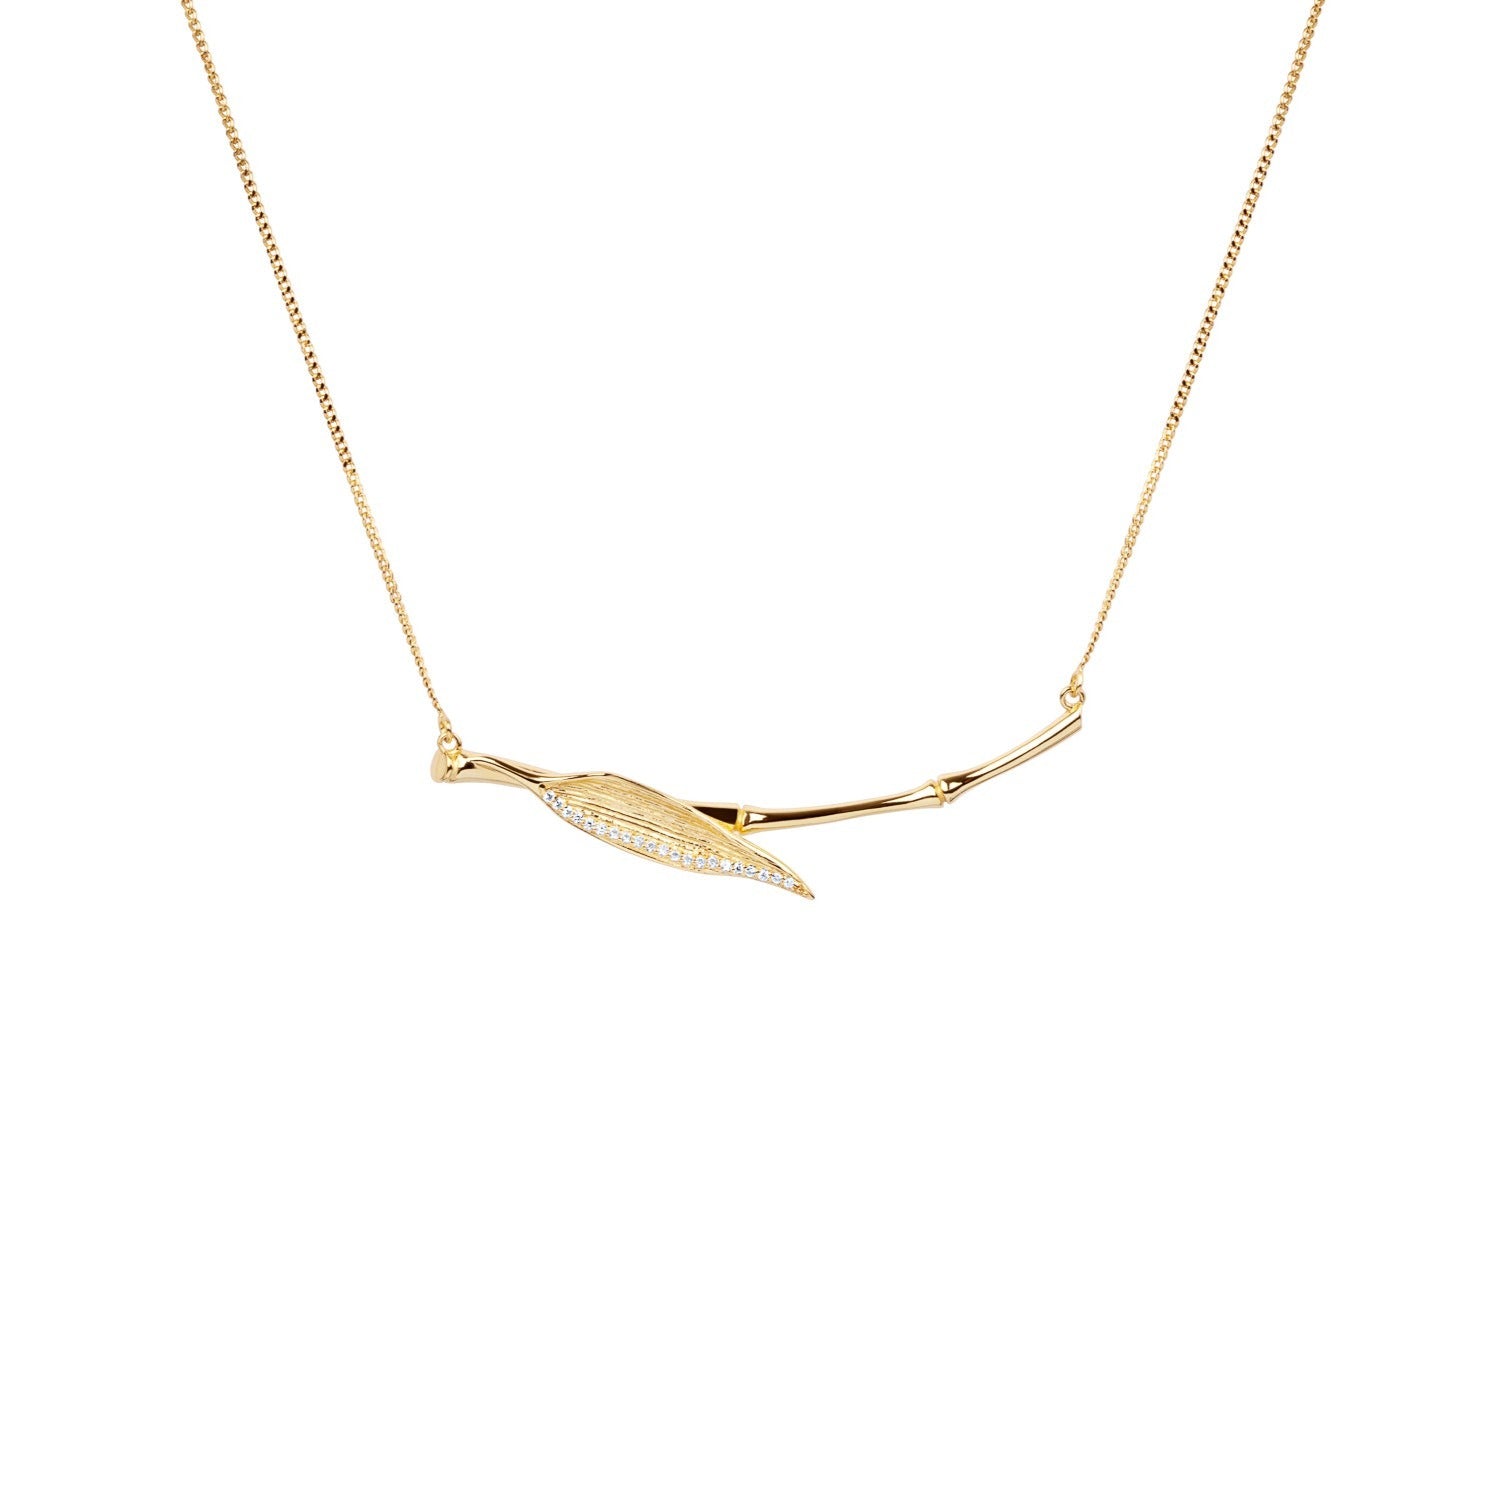 Gold Fern Necklace